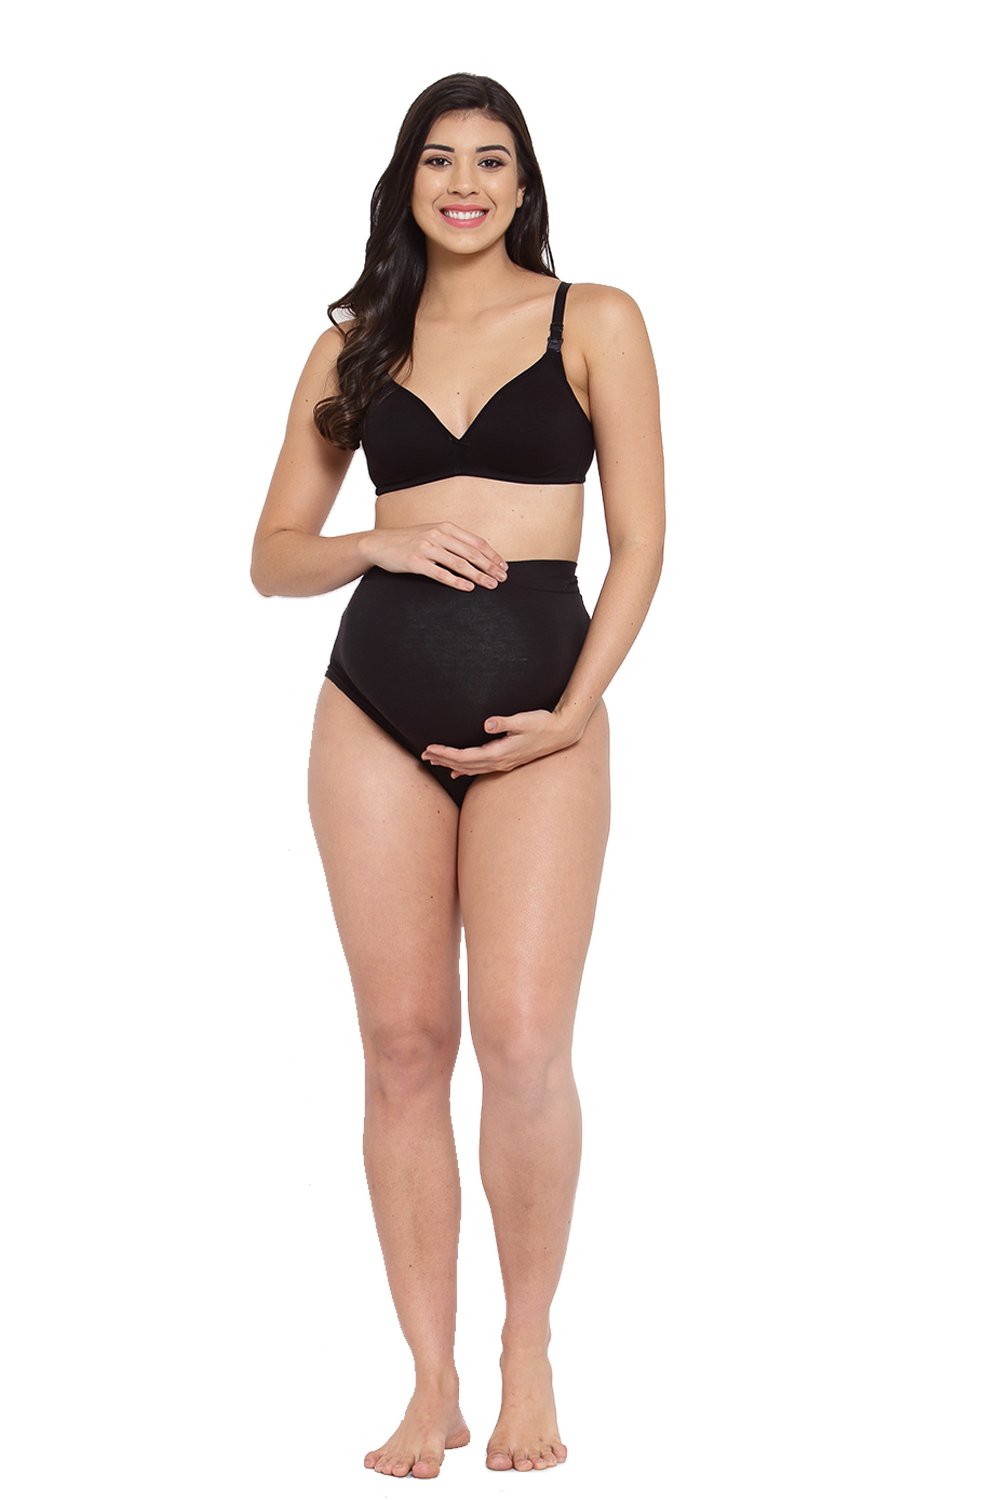 Organic Cotton Antimicrobial Maternity Panty- Pack of 2-IMPC101-Black_Black-